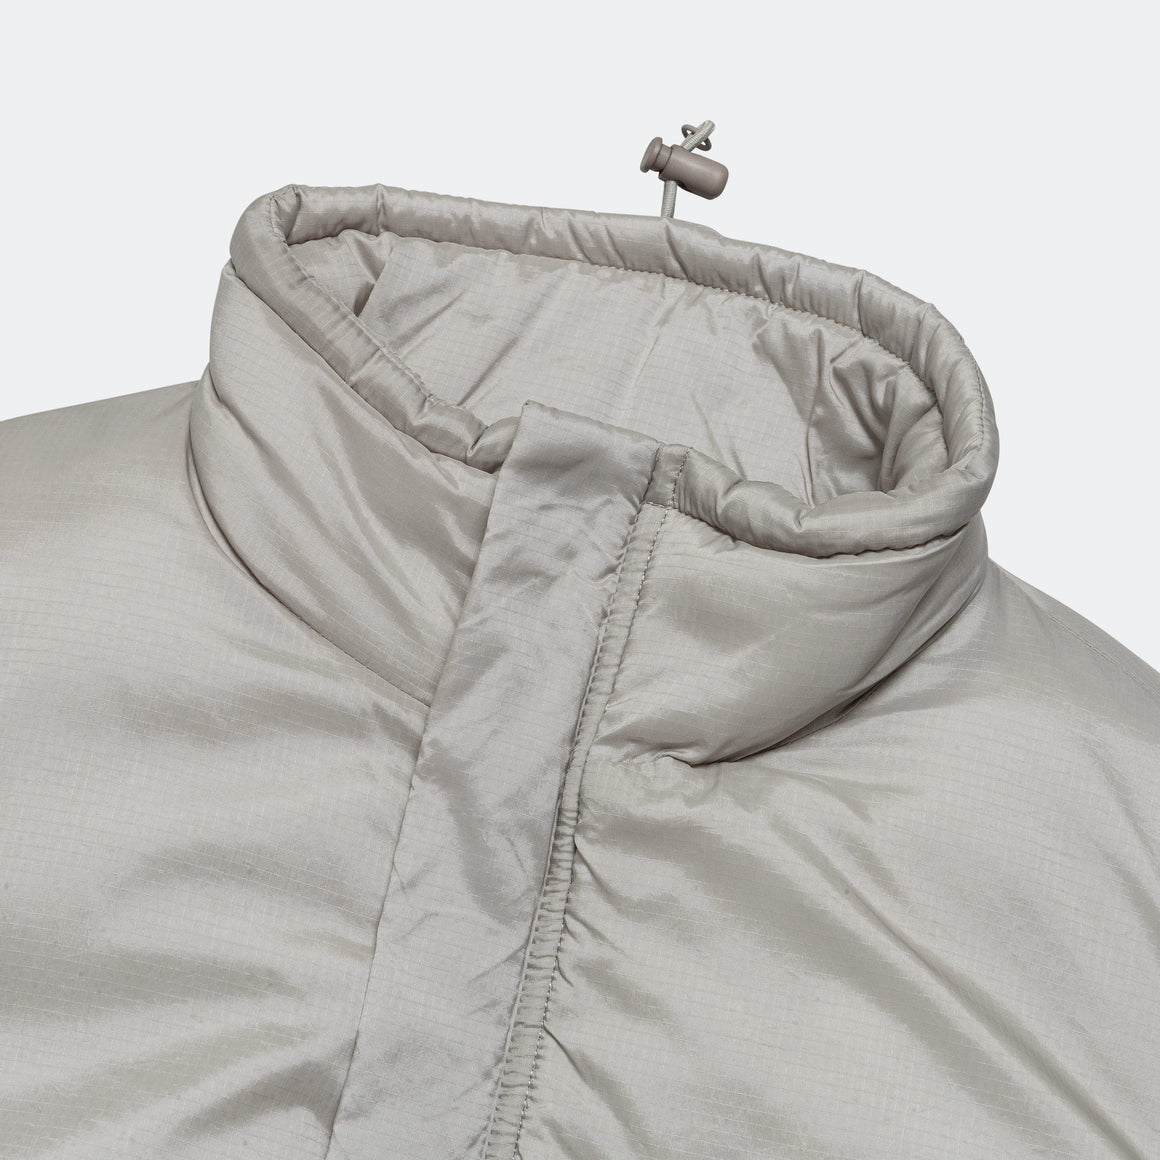 Beams Plus - MIL Puff Vest Nylon Rip Stop - Grey - UP THERE